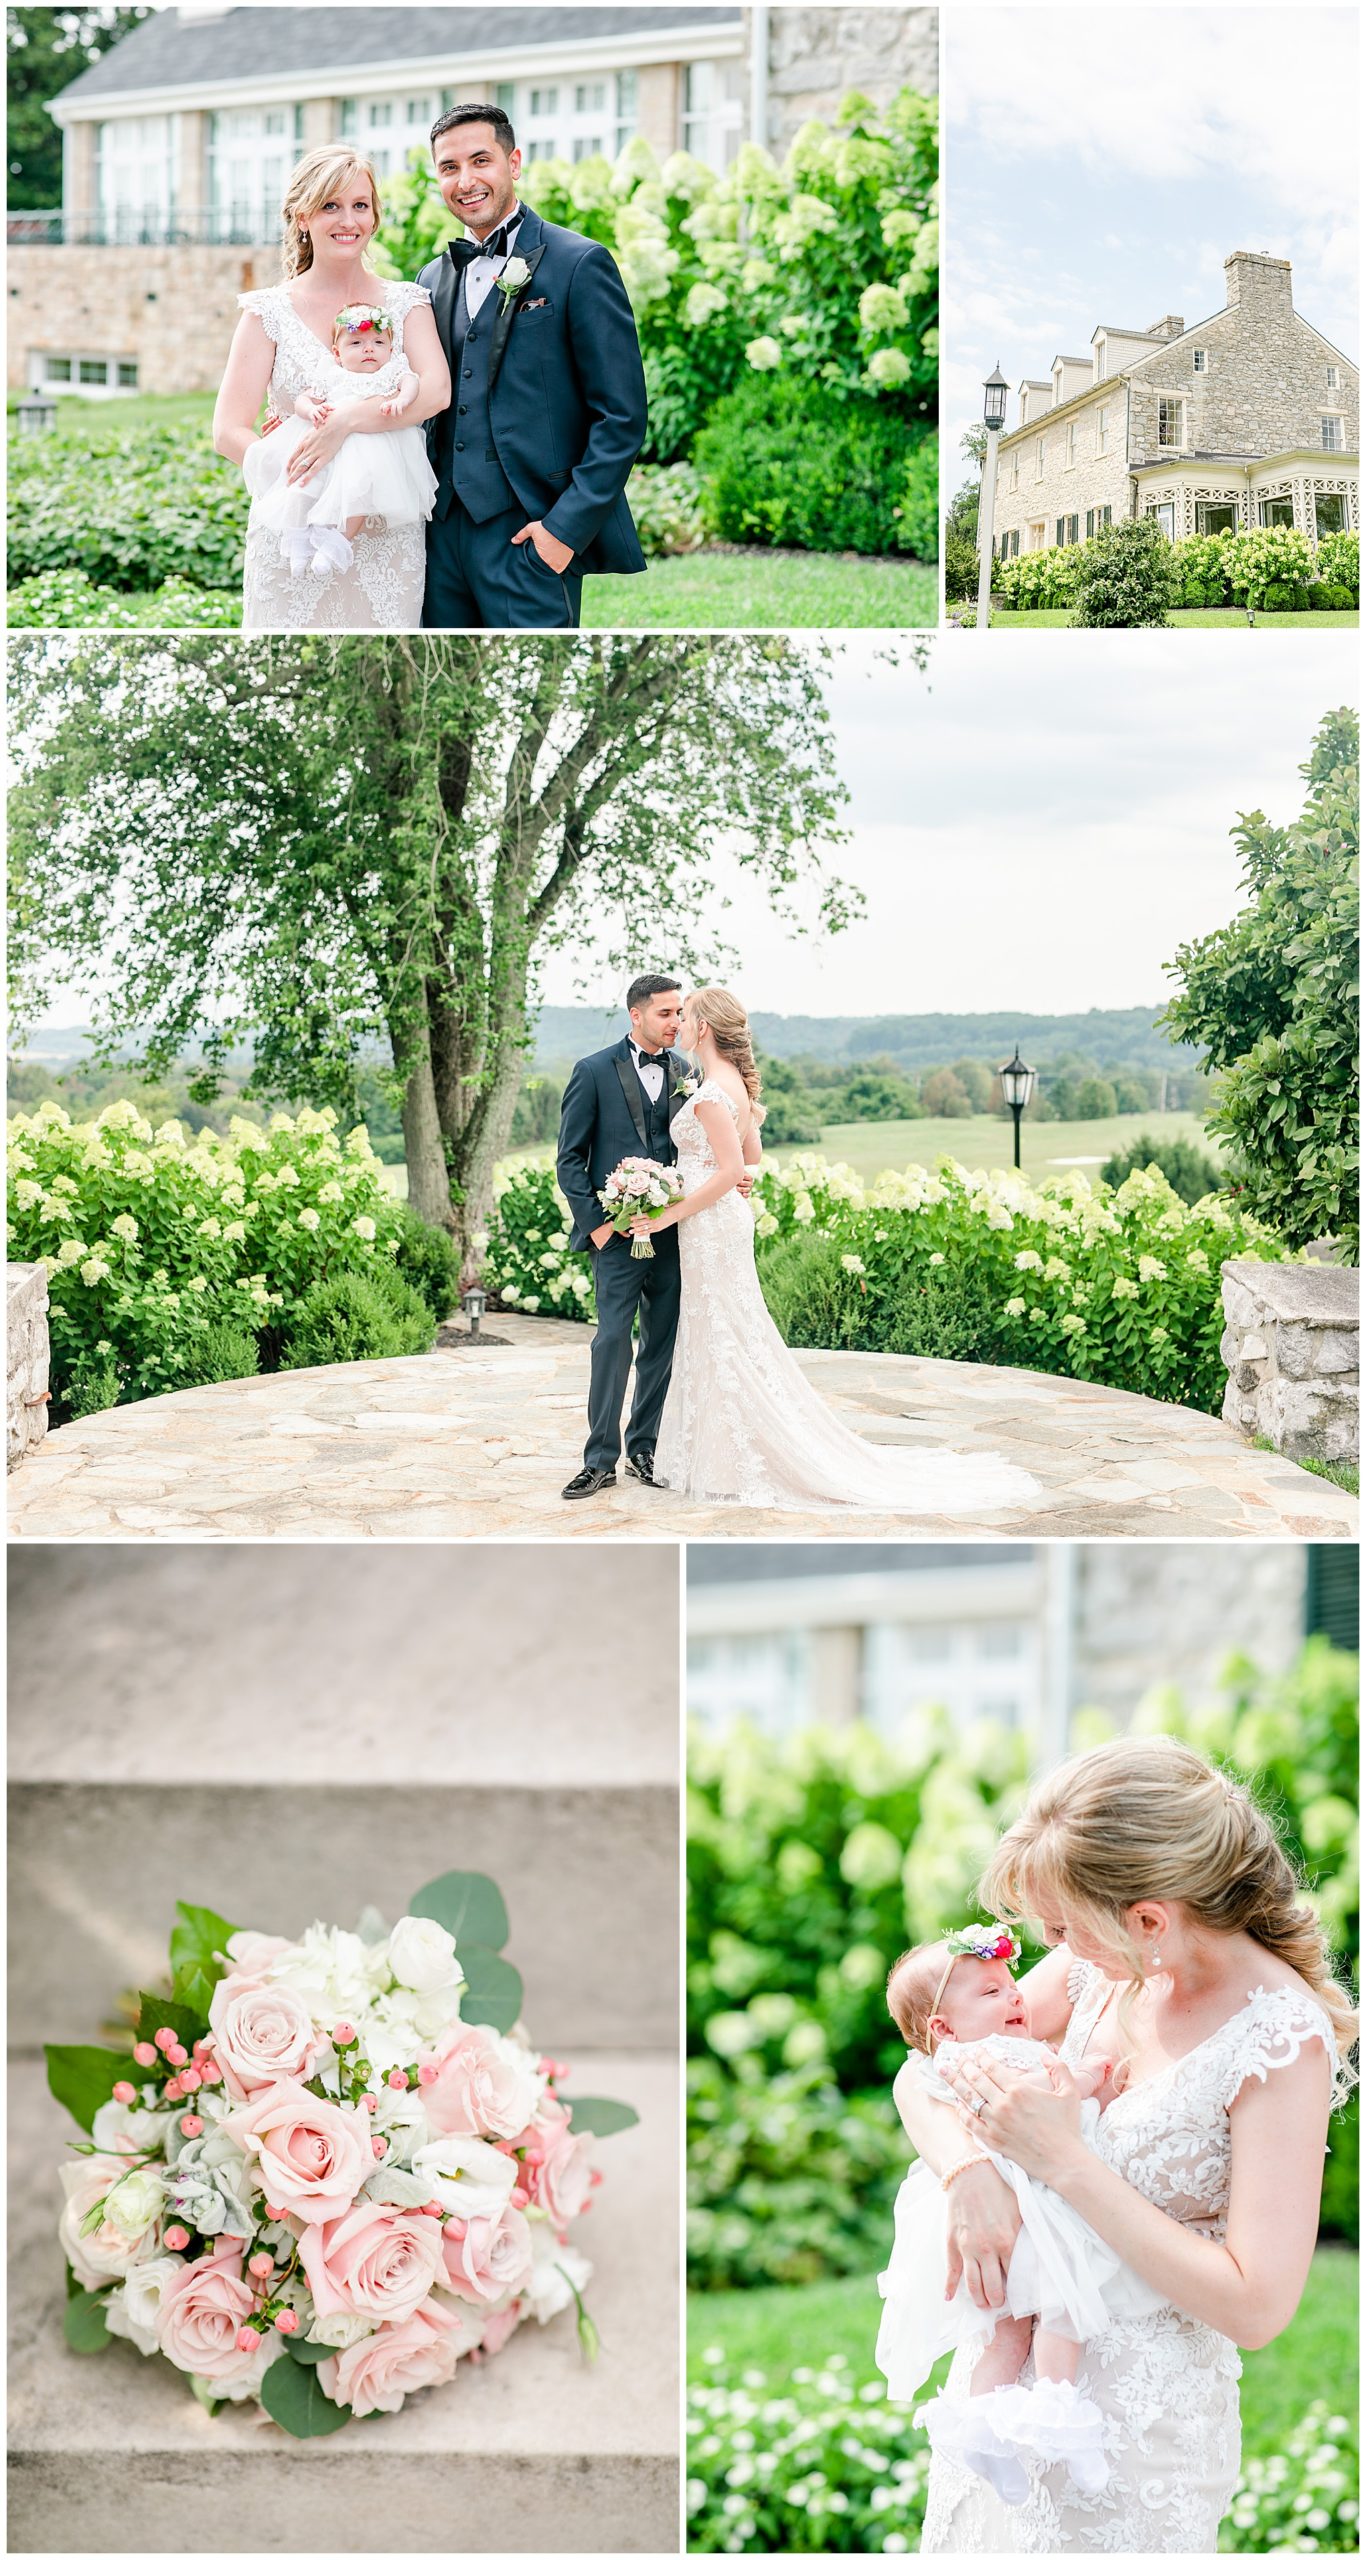 mid-summer Hayfields Country Club, Hunt Valley wedding, Baltimore wedding photographer, Rachel E.H. Photography, DC wedding photographer, summer wedding, pink and navy aesthetic, Washington DC wedding photography, Baltimore wedding photography, hydrangea, newlywed portraits, epic portrait